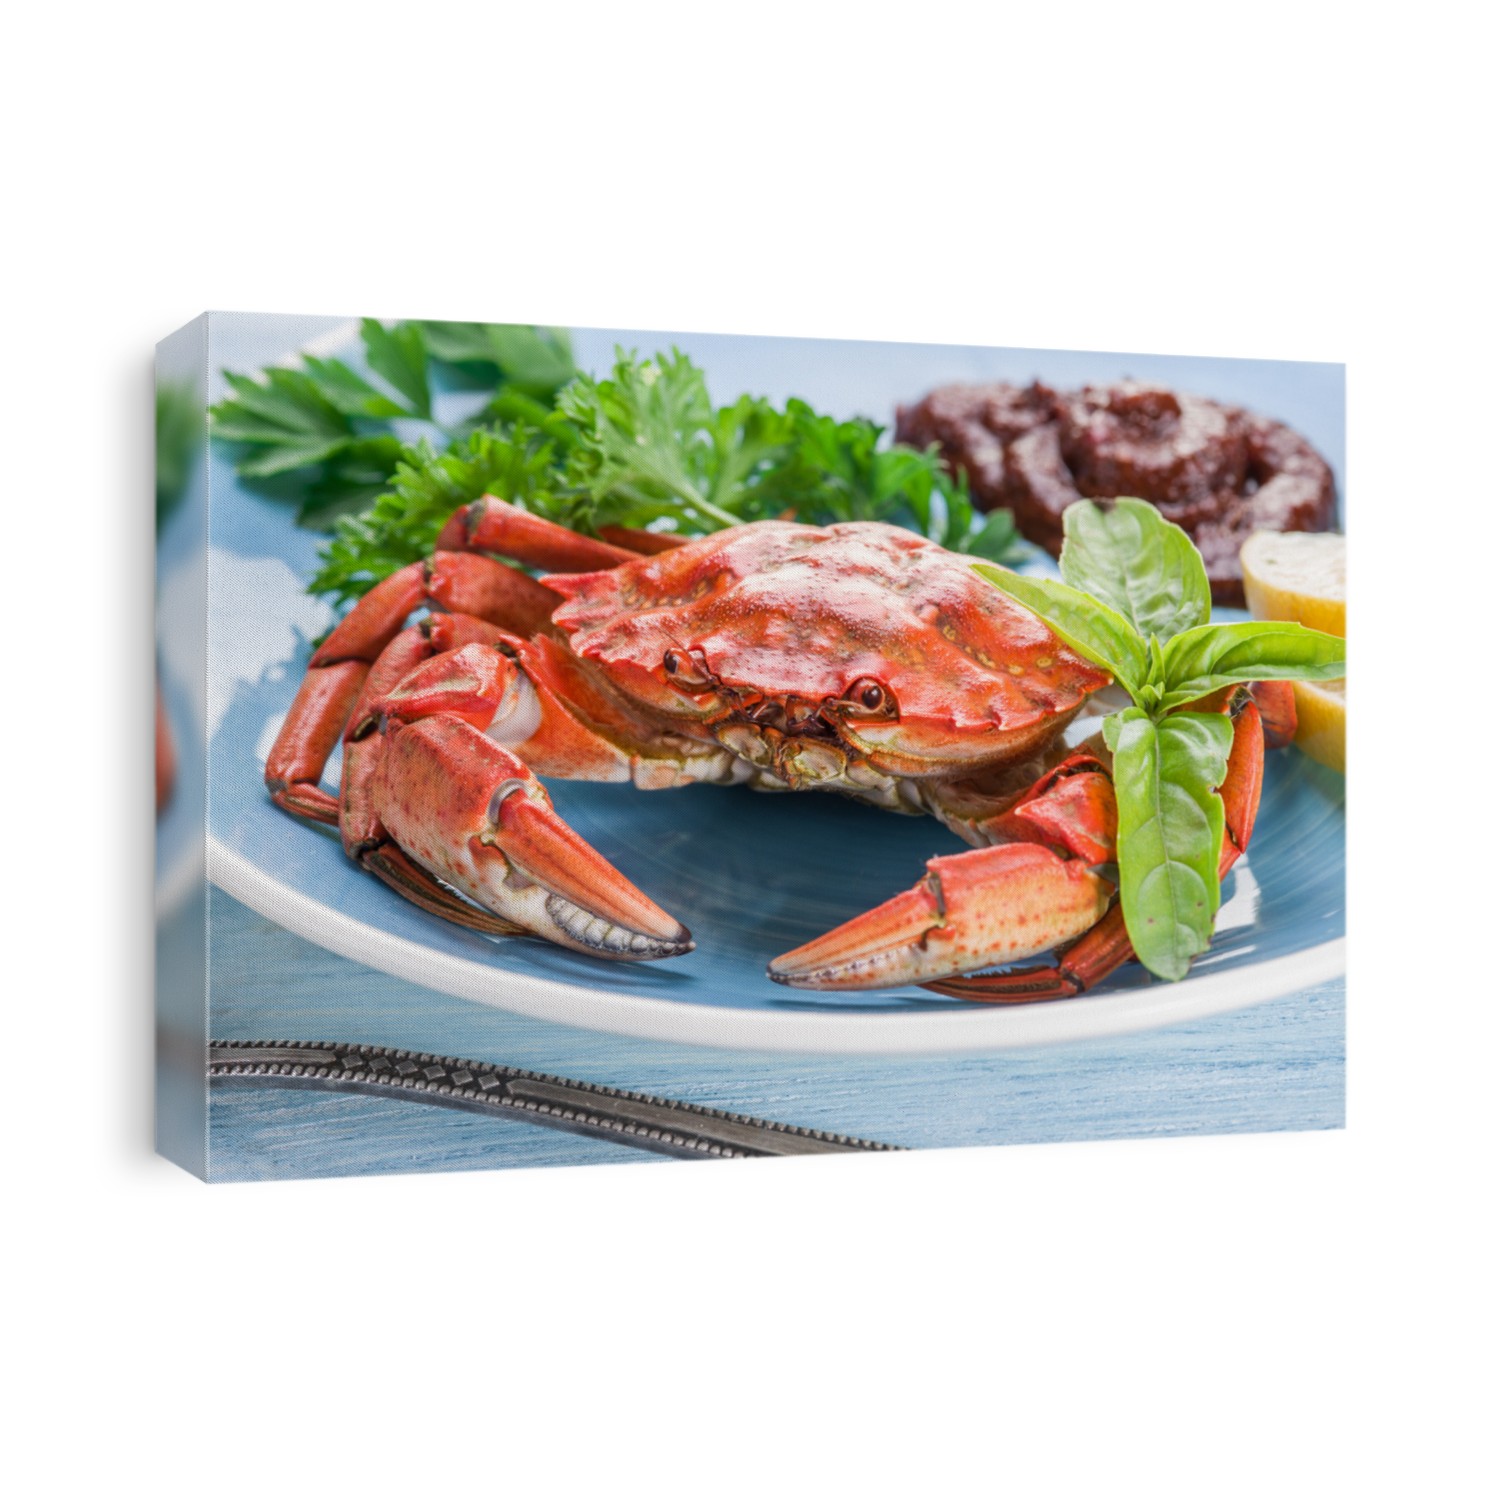 Seafood dish - cooked crab with lemon and herbs.